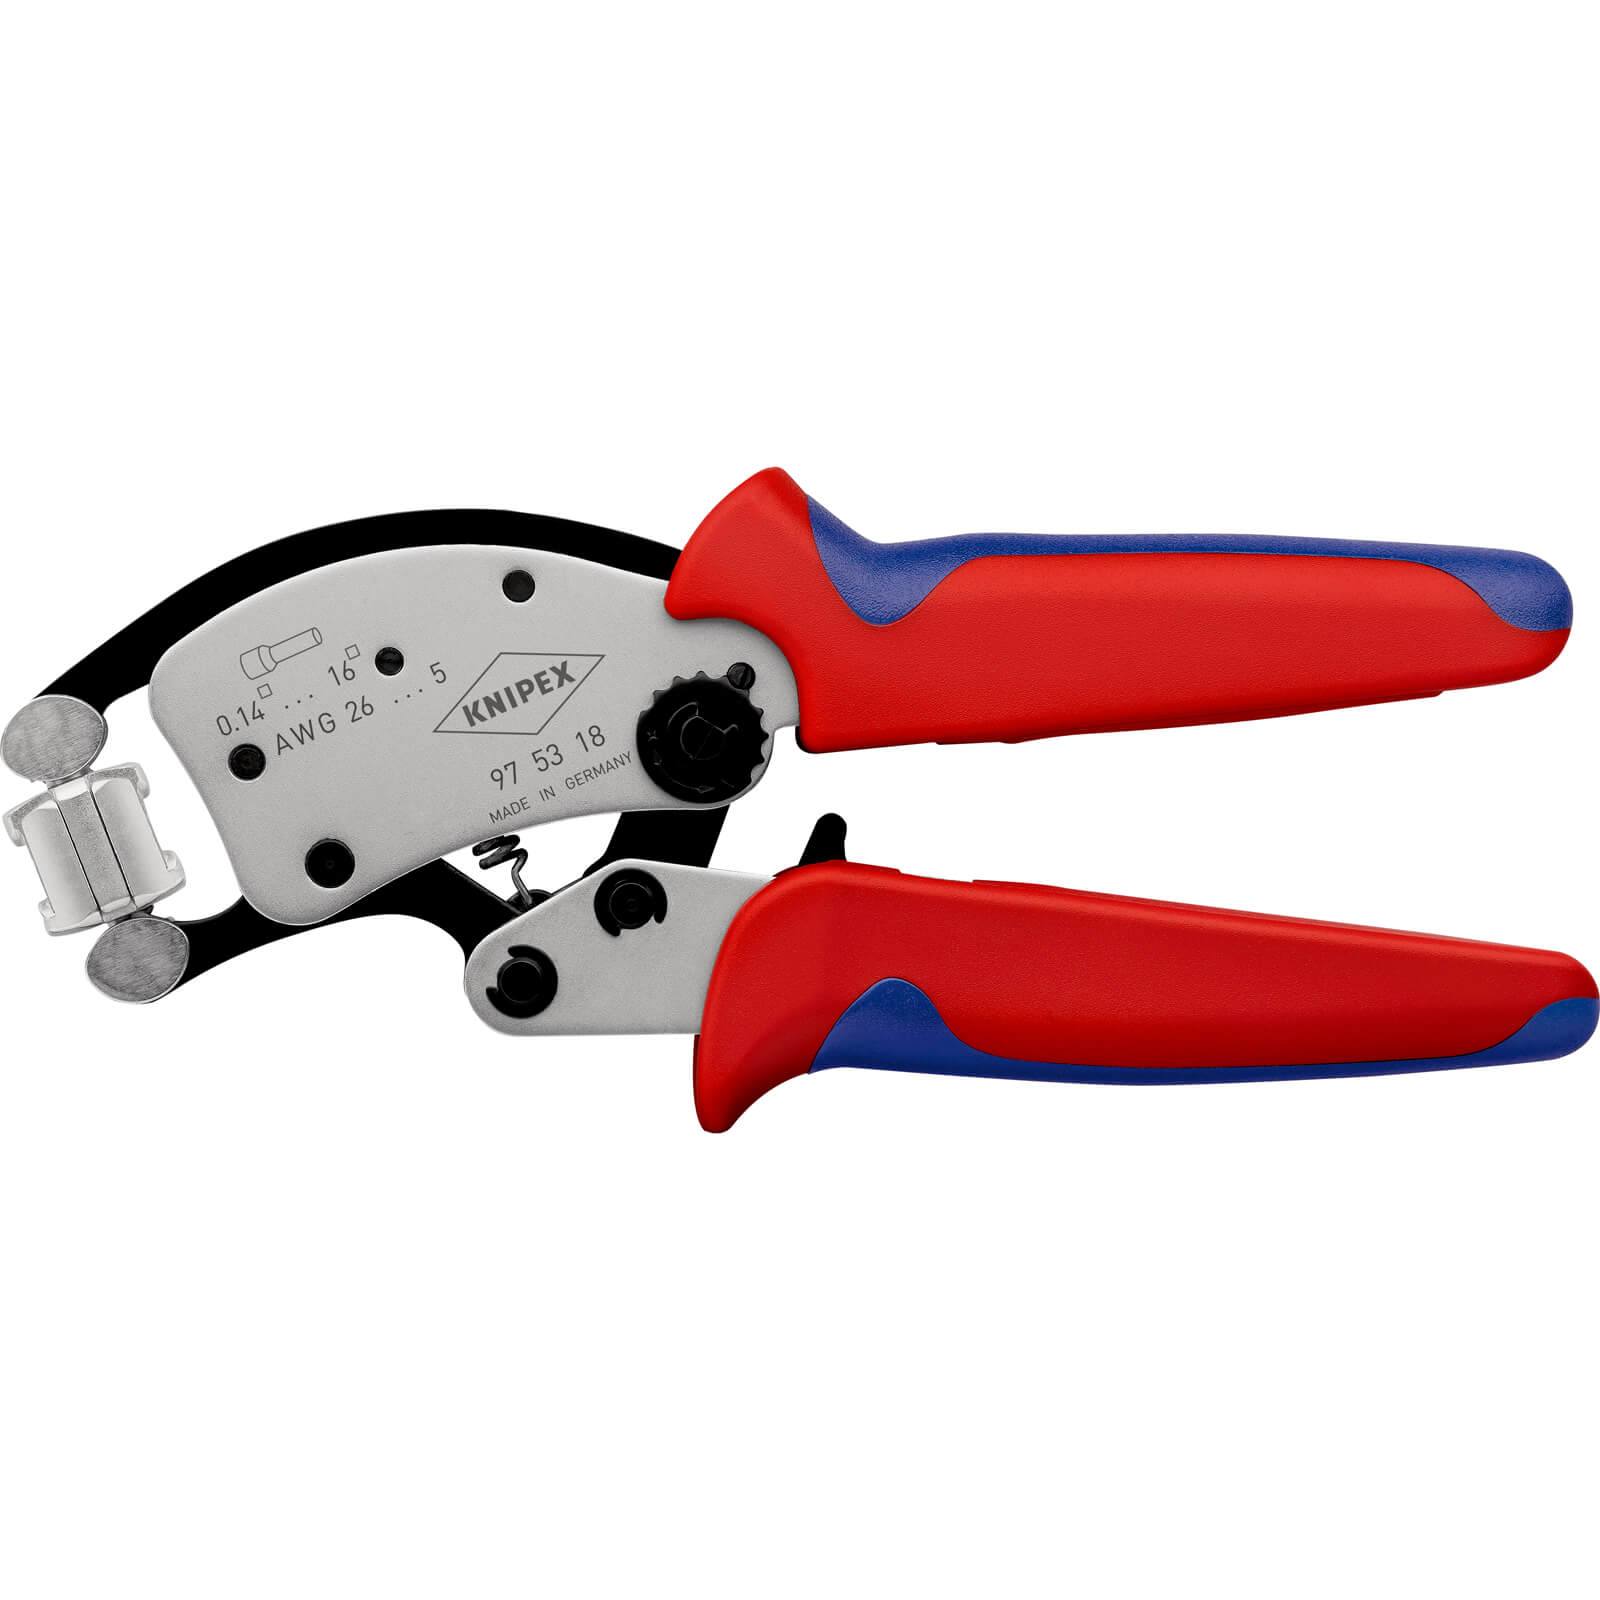 Photo of Knipex 97 53 Twistor16 Self Adjusting Crimping Pliers